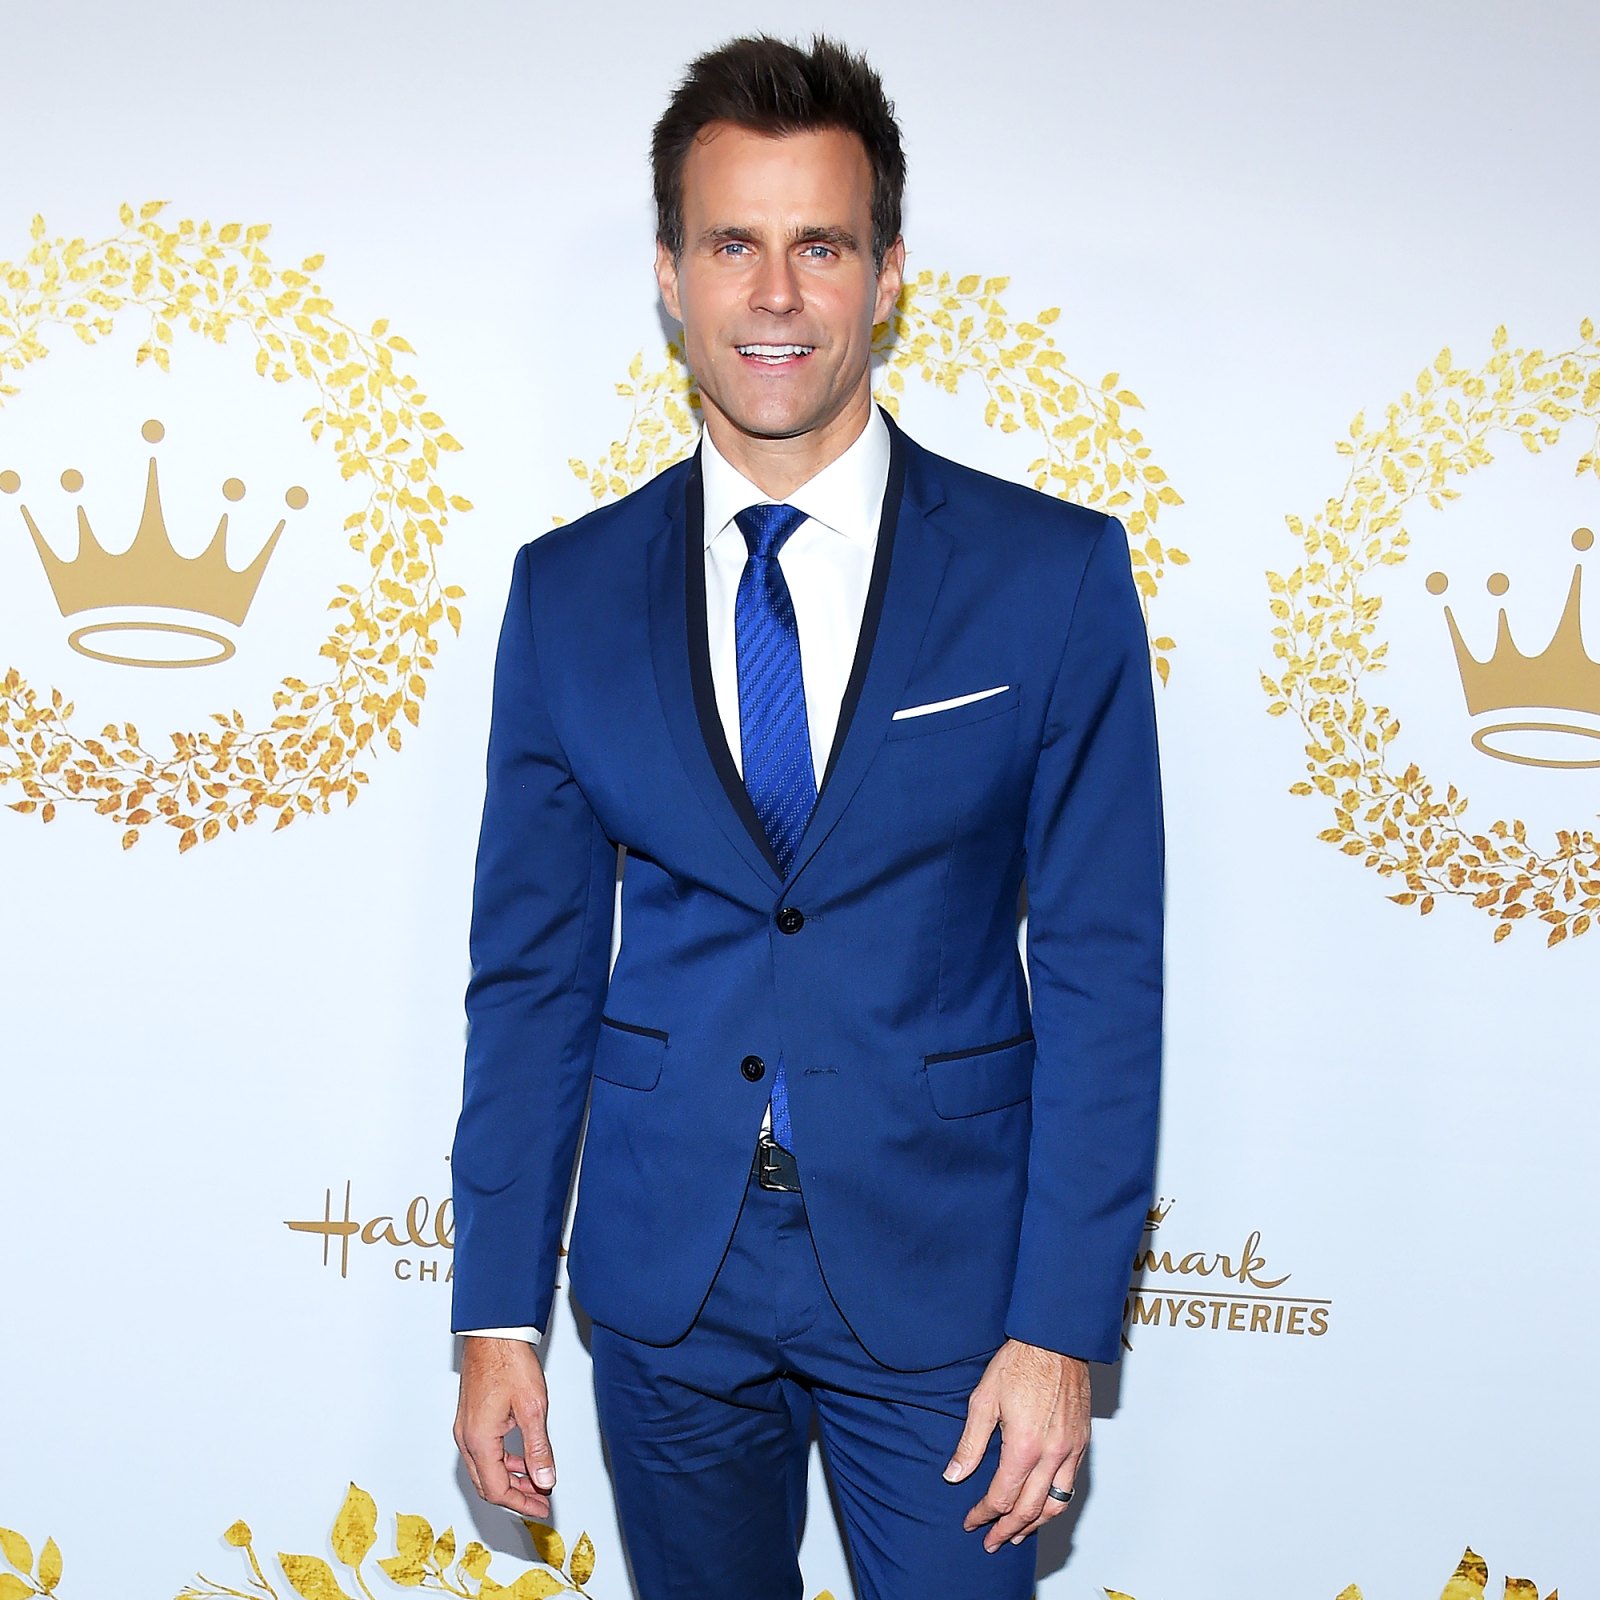 Cameron Mathison Feels Super Grateful After Difficult Cancer Diagnosis